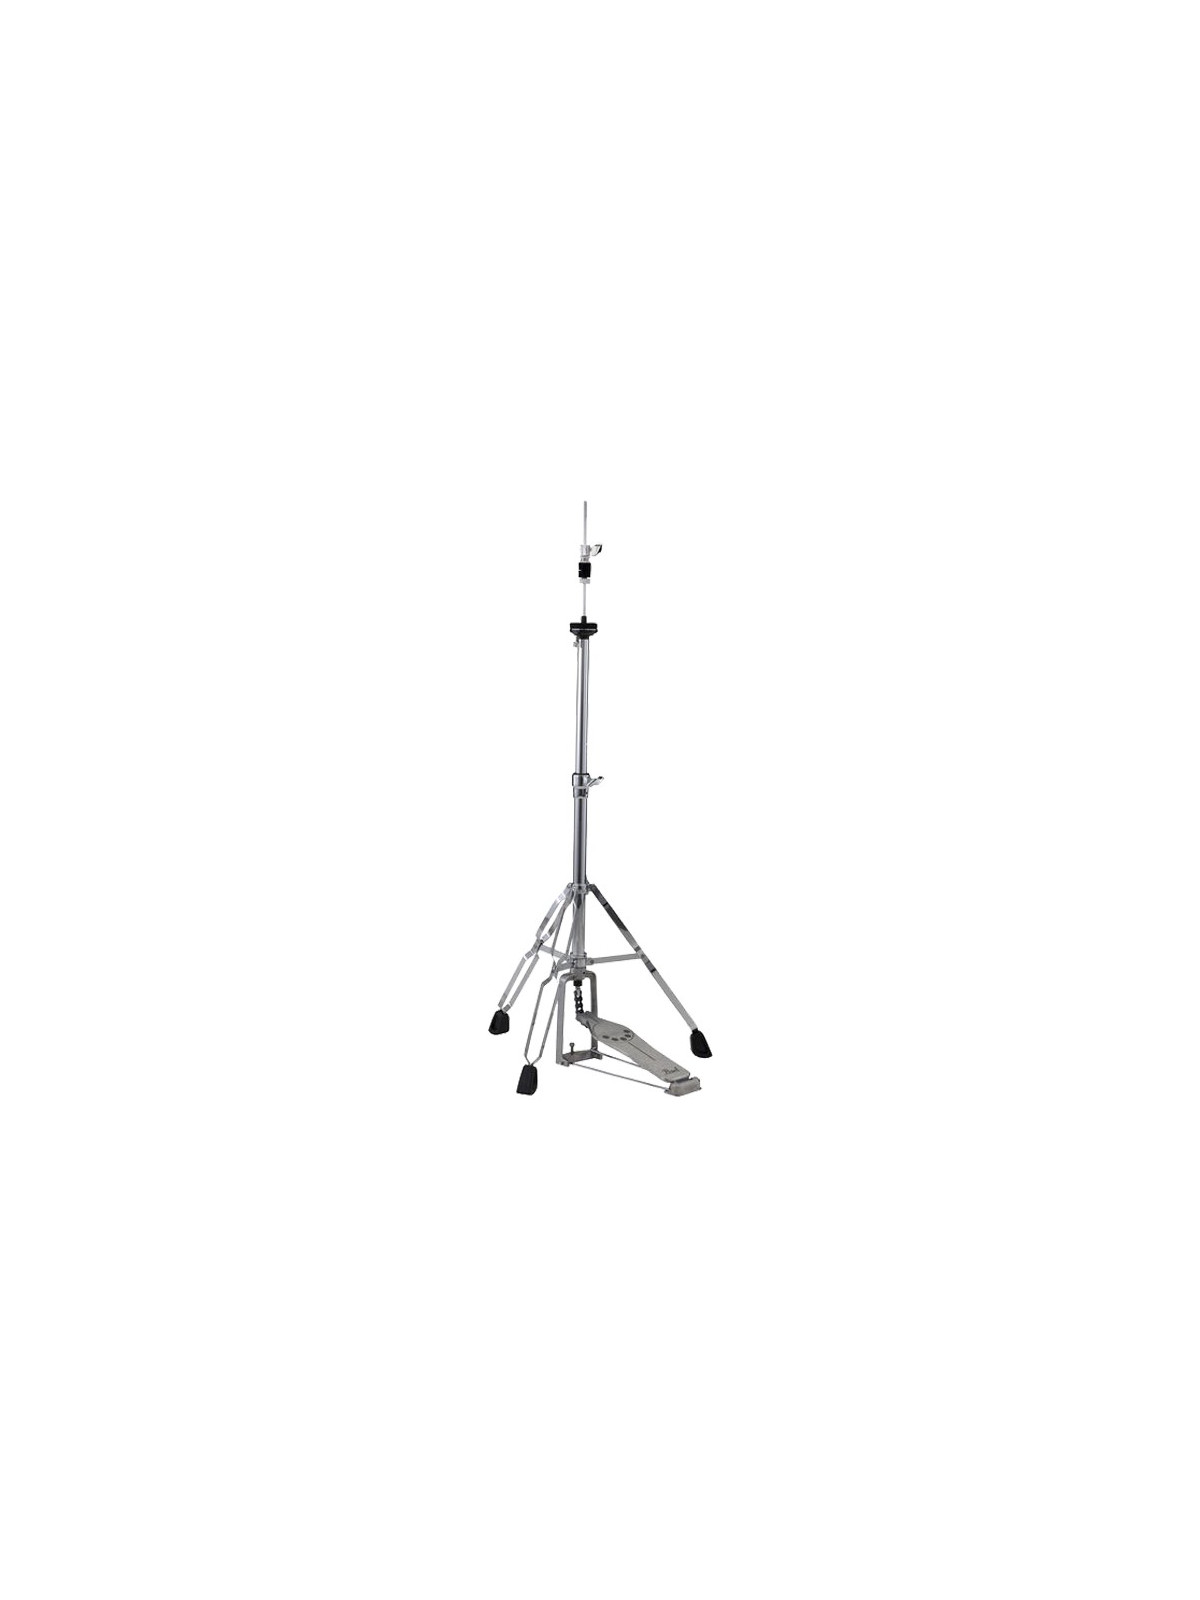 Pearl H-830 Stand HiHat